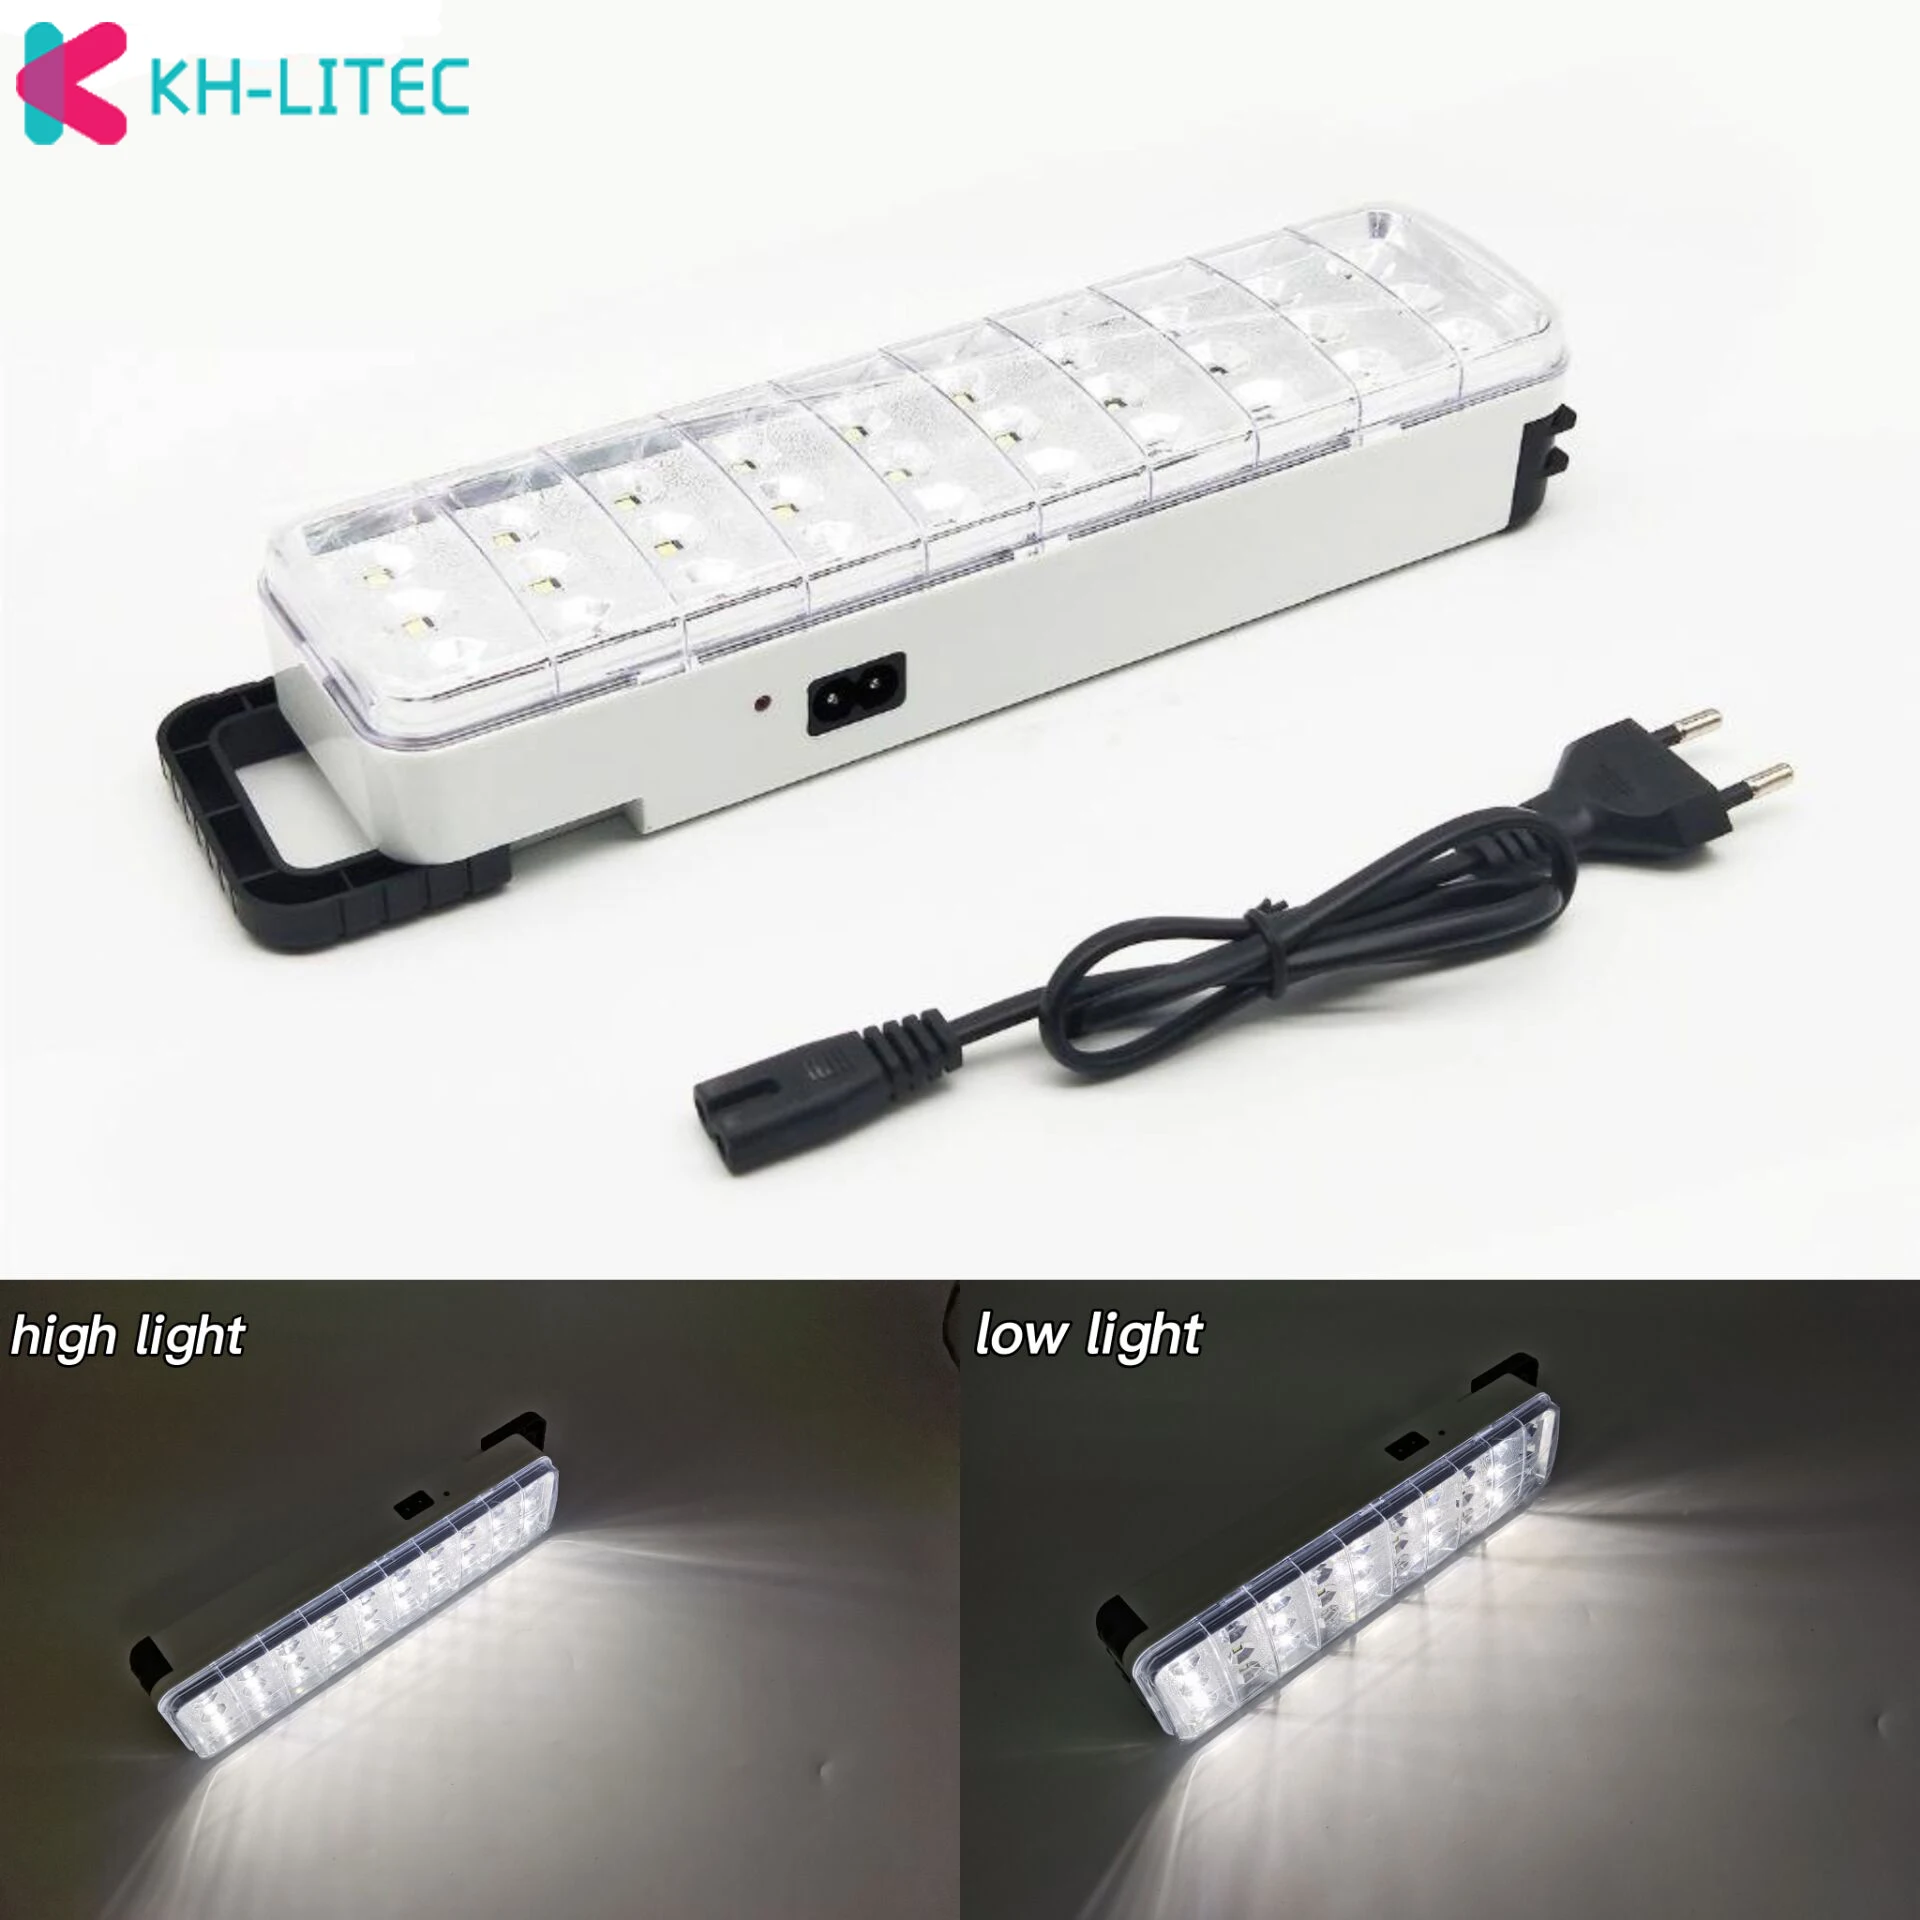 30LED Multi-function Emergency Light Flashlight Rechargeable LED Safety Lamp Inspection Lamp 2 Mode For Home Camp Outdoor